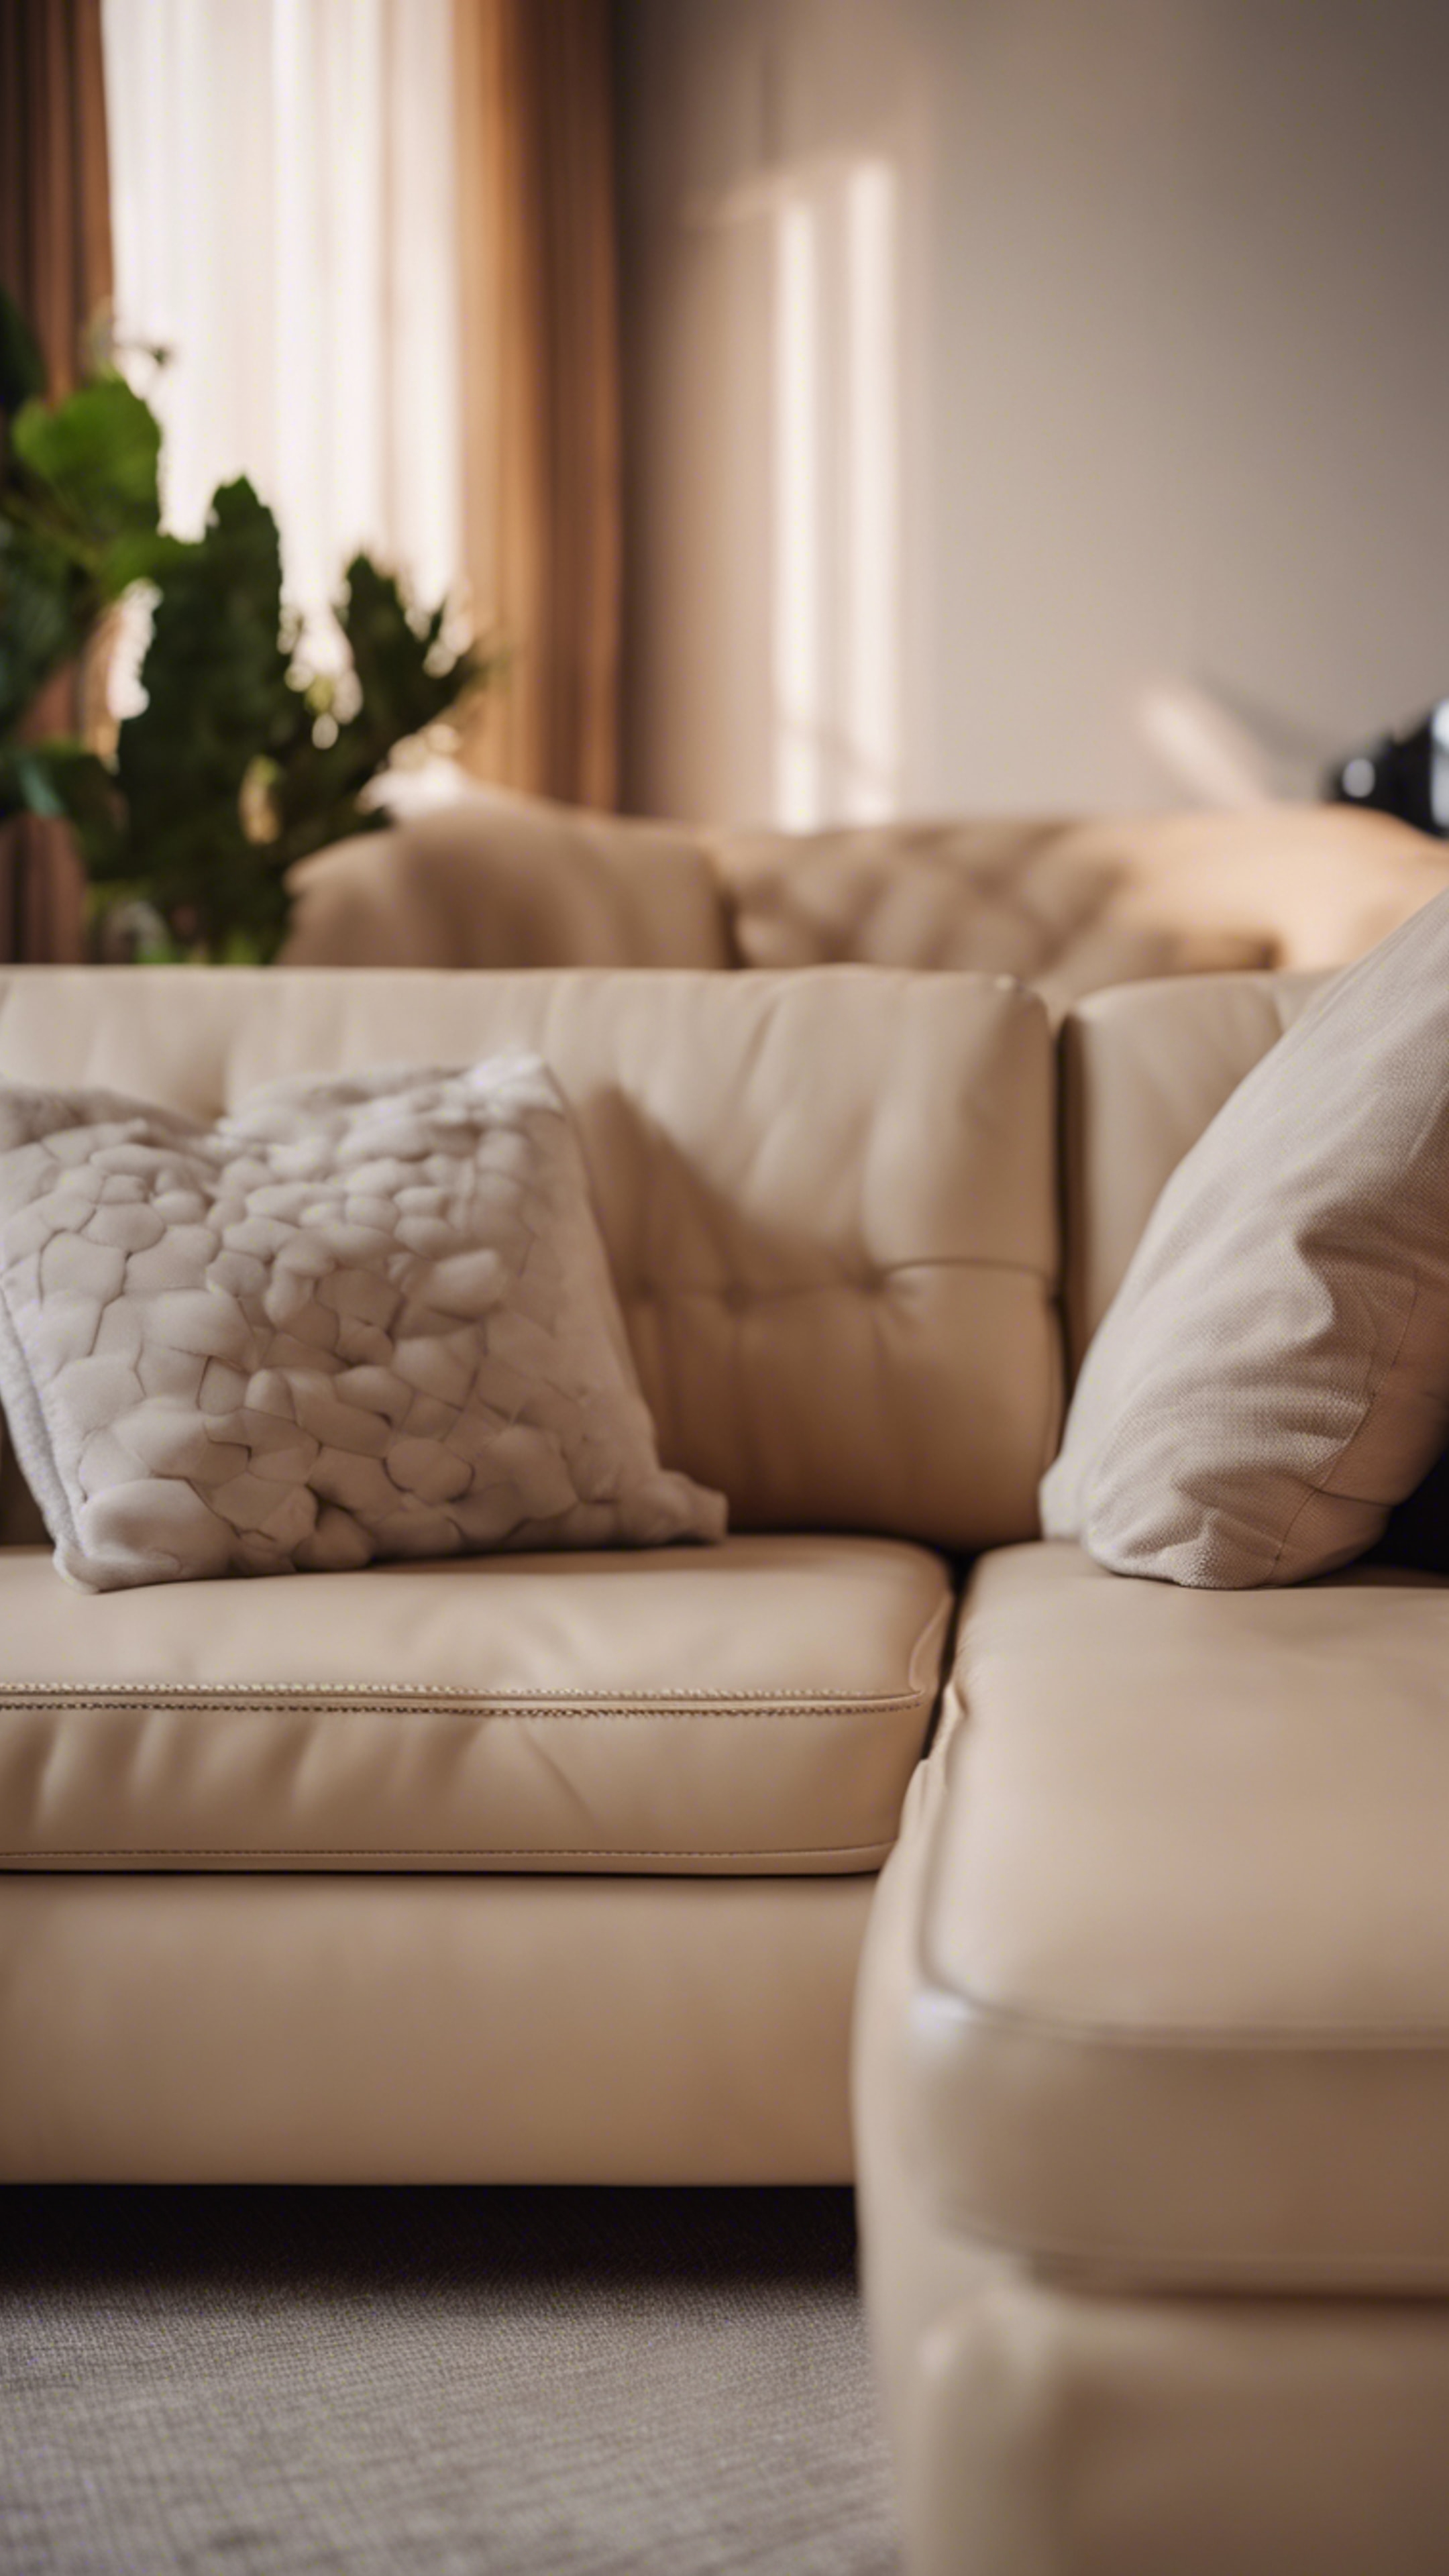 A new, beige leather sofa sitting cozily in a minimalist living room with warm lighting. 墙纸[50f9d766dce04faf8d3f]